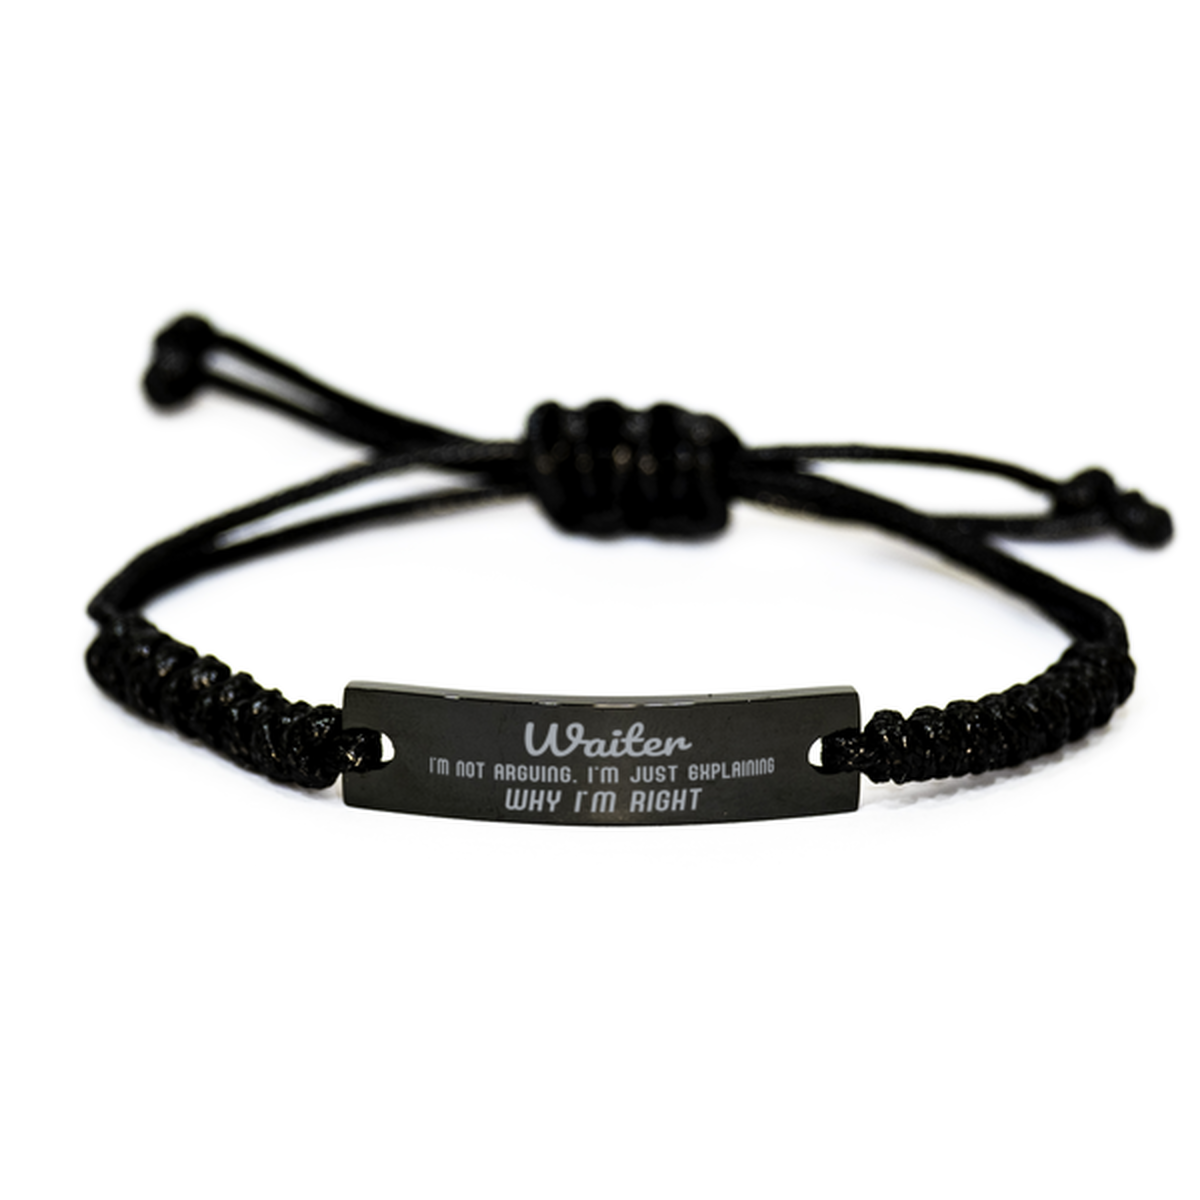 Waiter I'm not Arguing. I'm Just Explaining Why I'm RIGHT Black Rope Bracelet, Funny Saying Quote Waiter Gifts For Waiter Graduation Birthday Christmas Gifts for Men Women Coworker